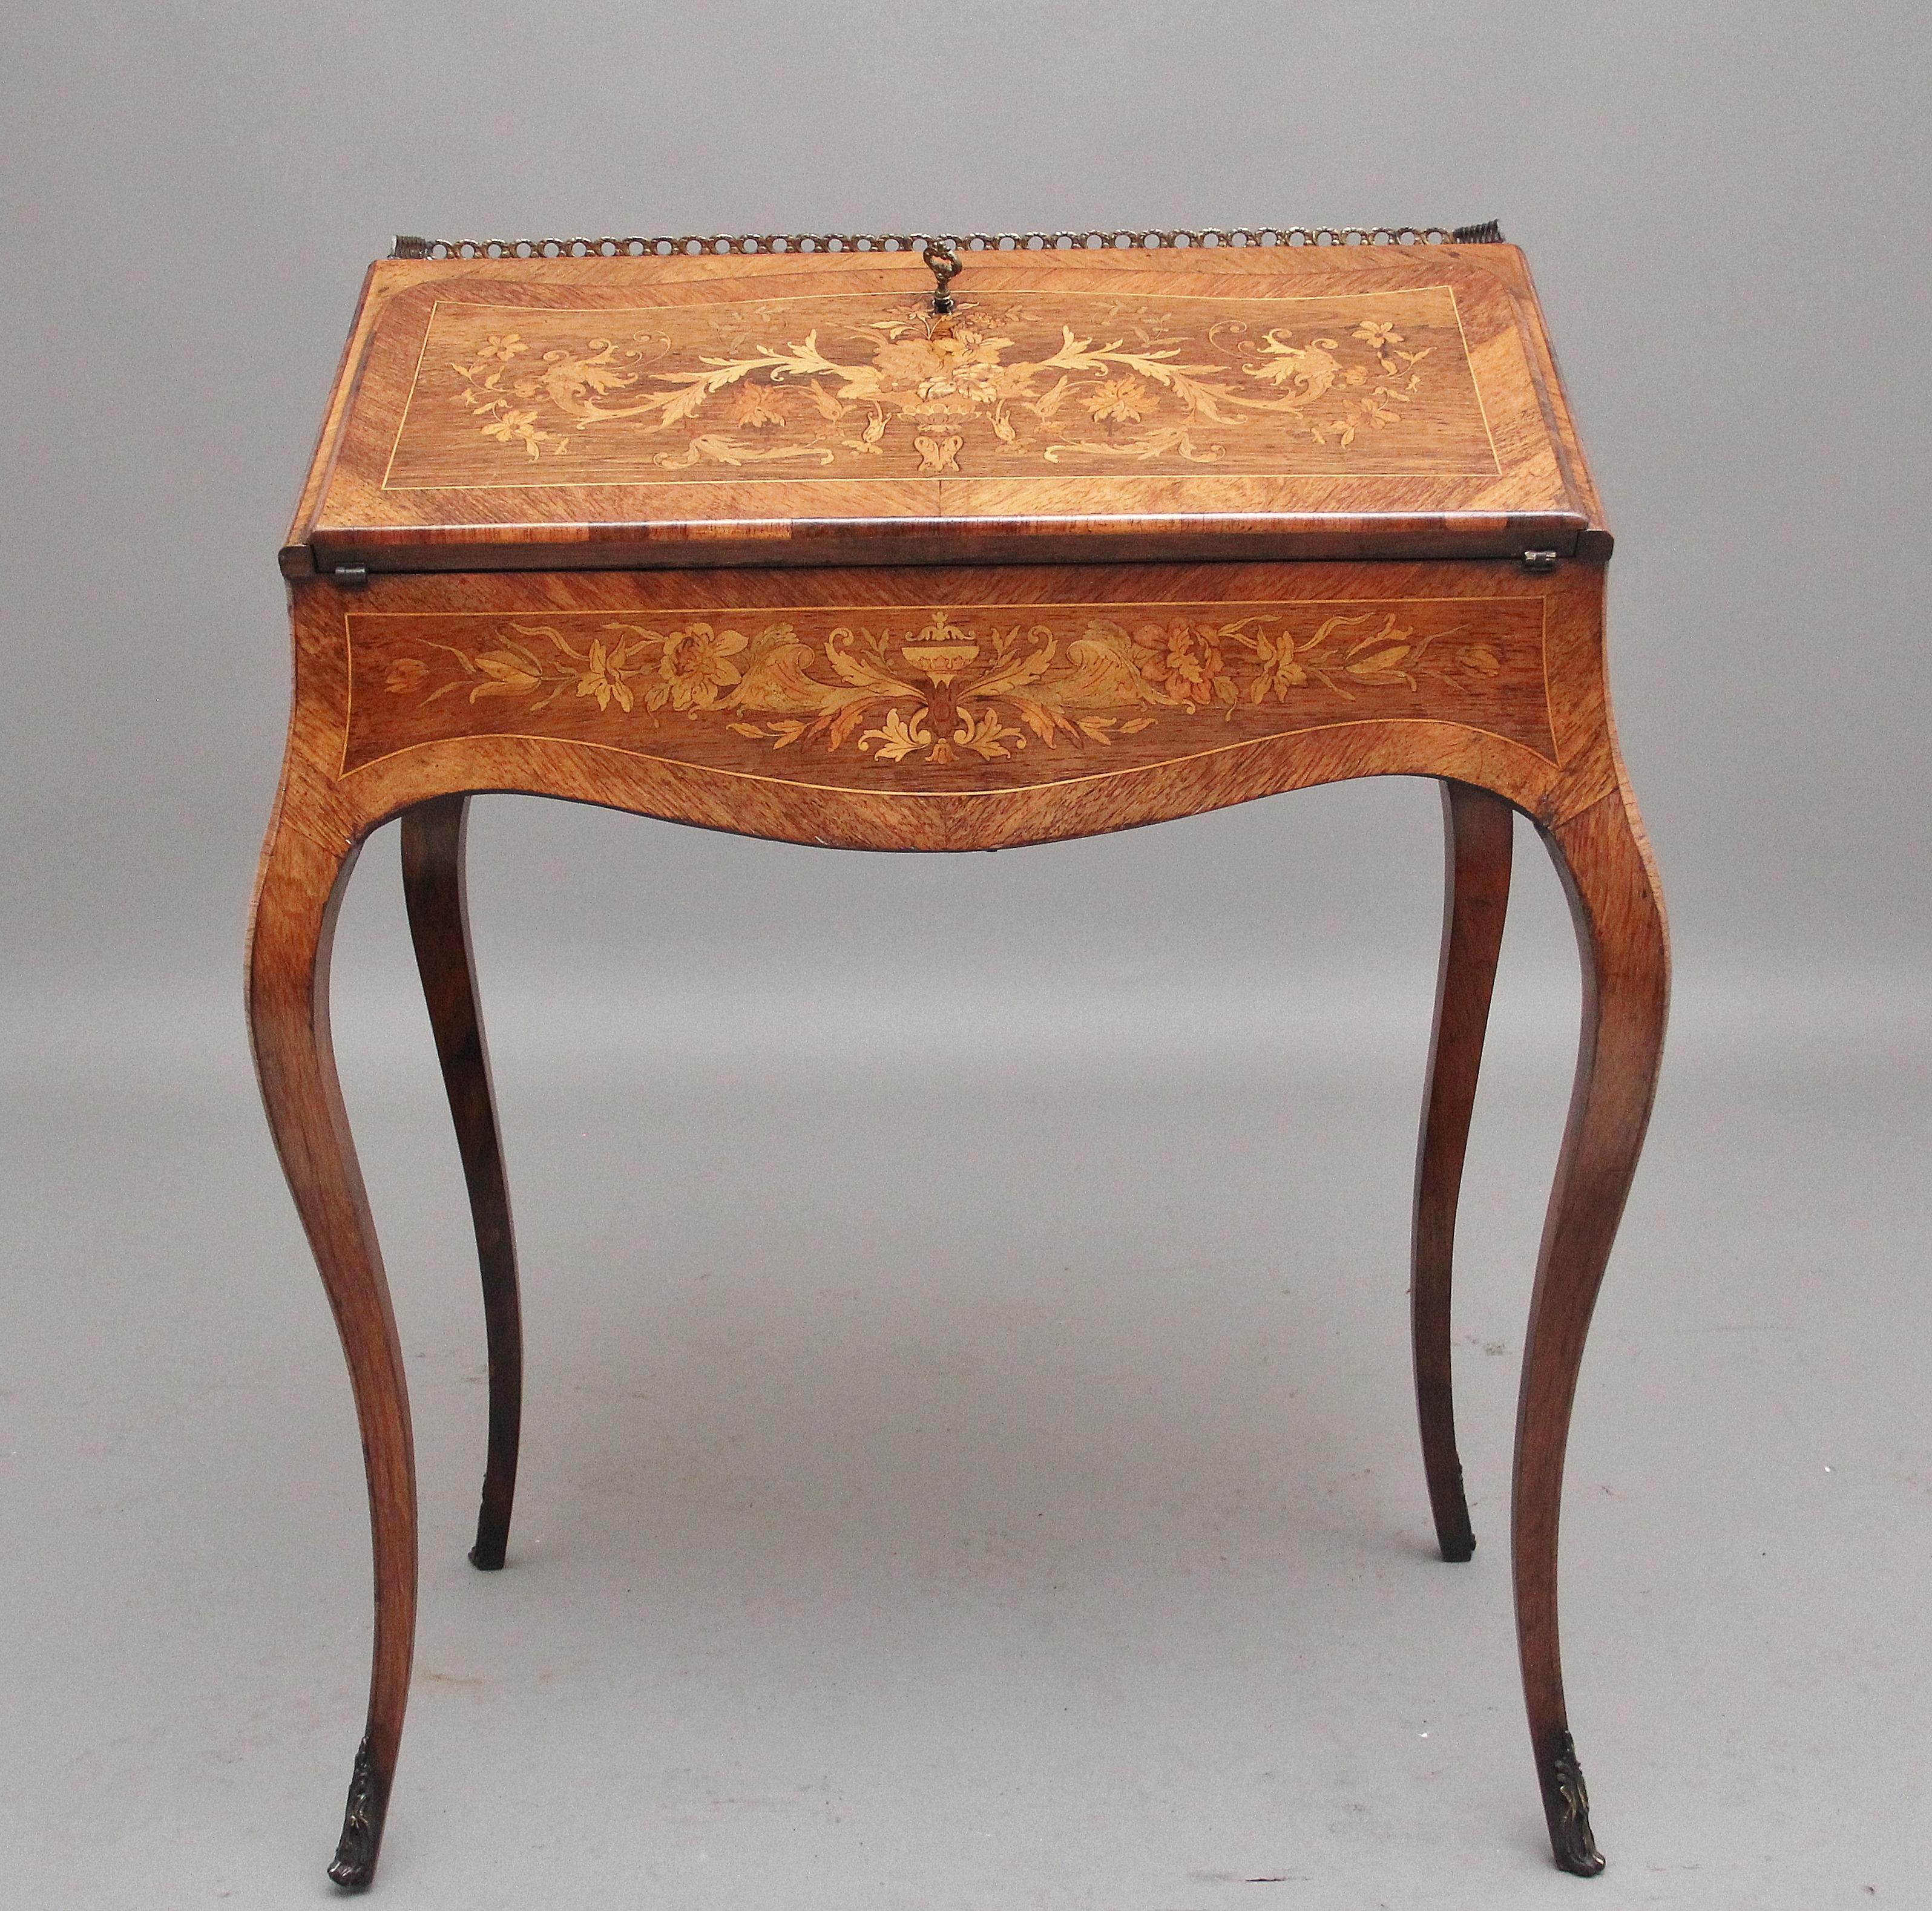 British Superb Quality Freestanding 19th Century Kingwood and Marquetry Inlaid Bureau For Sale